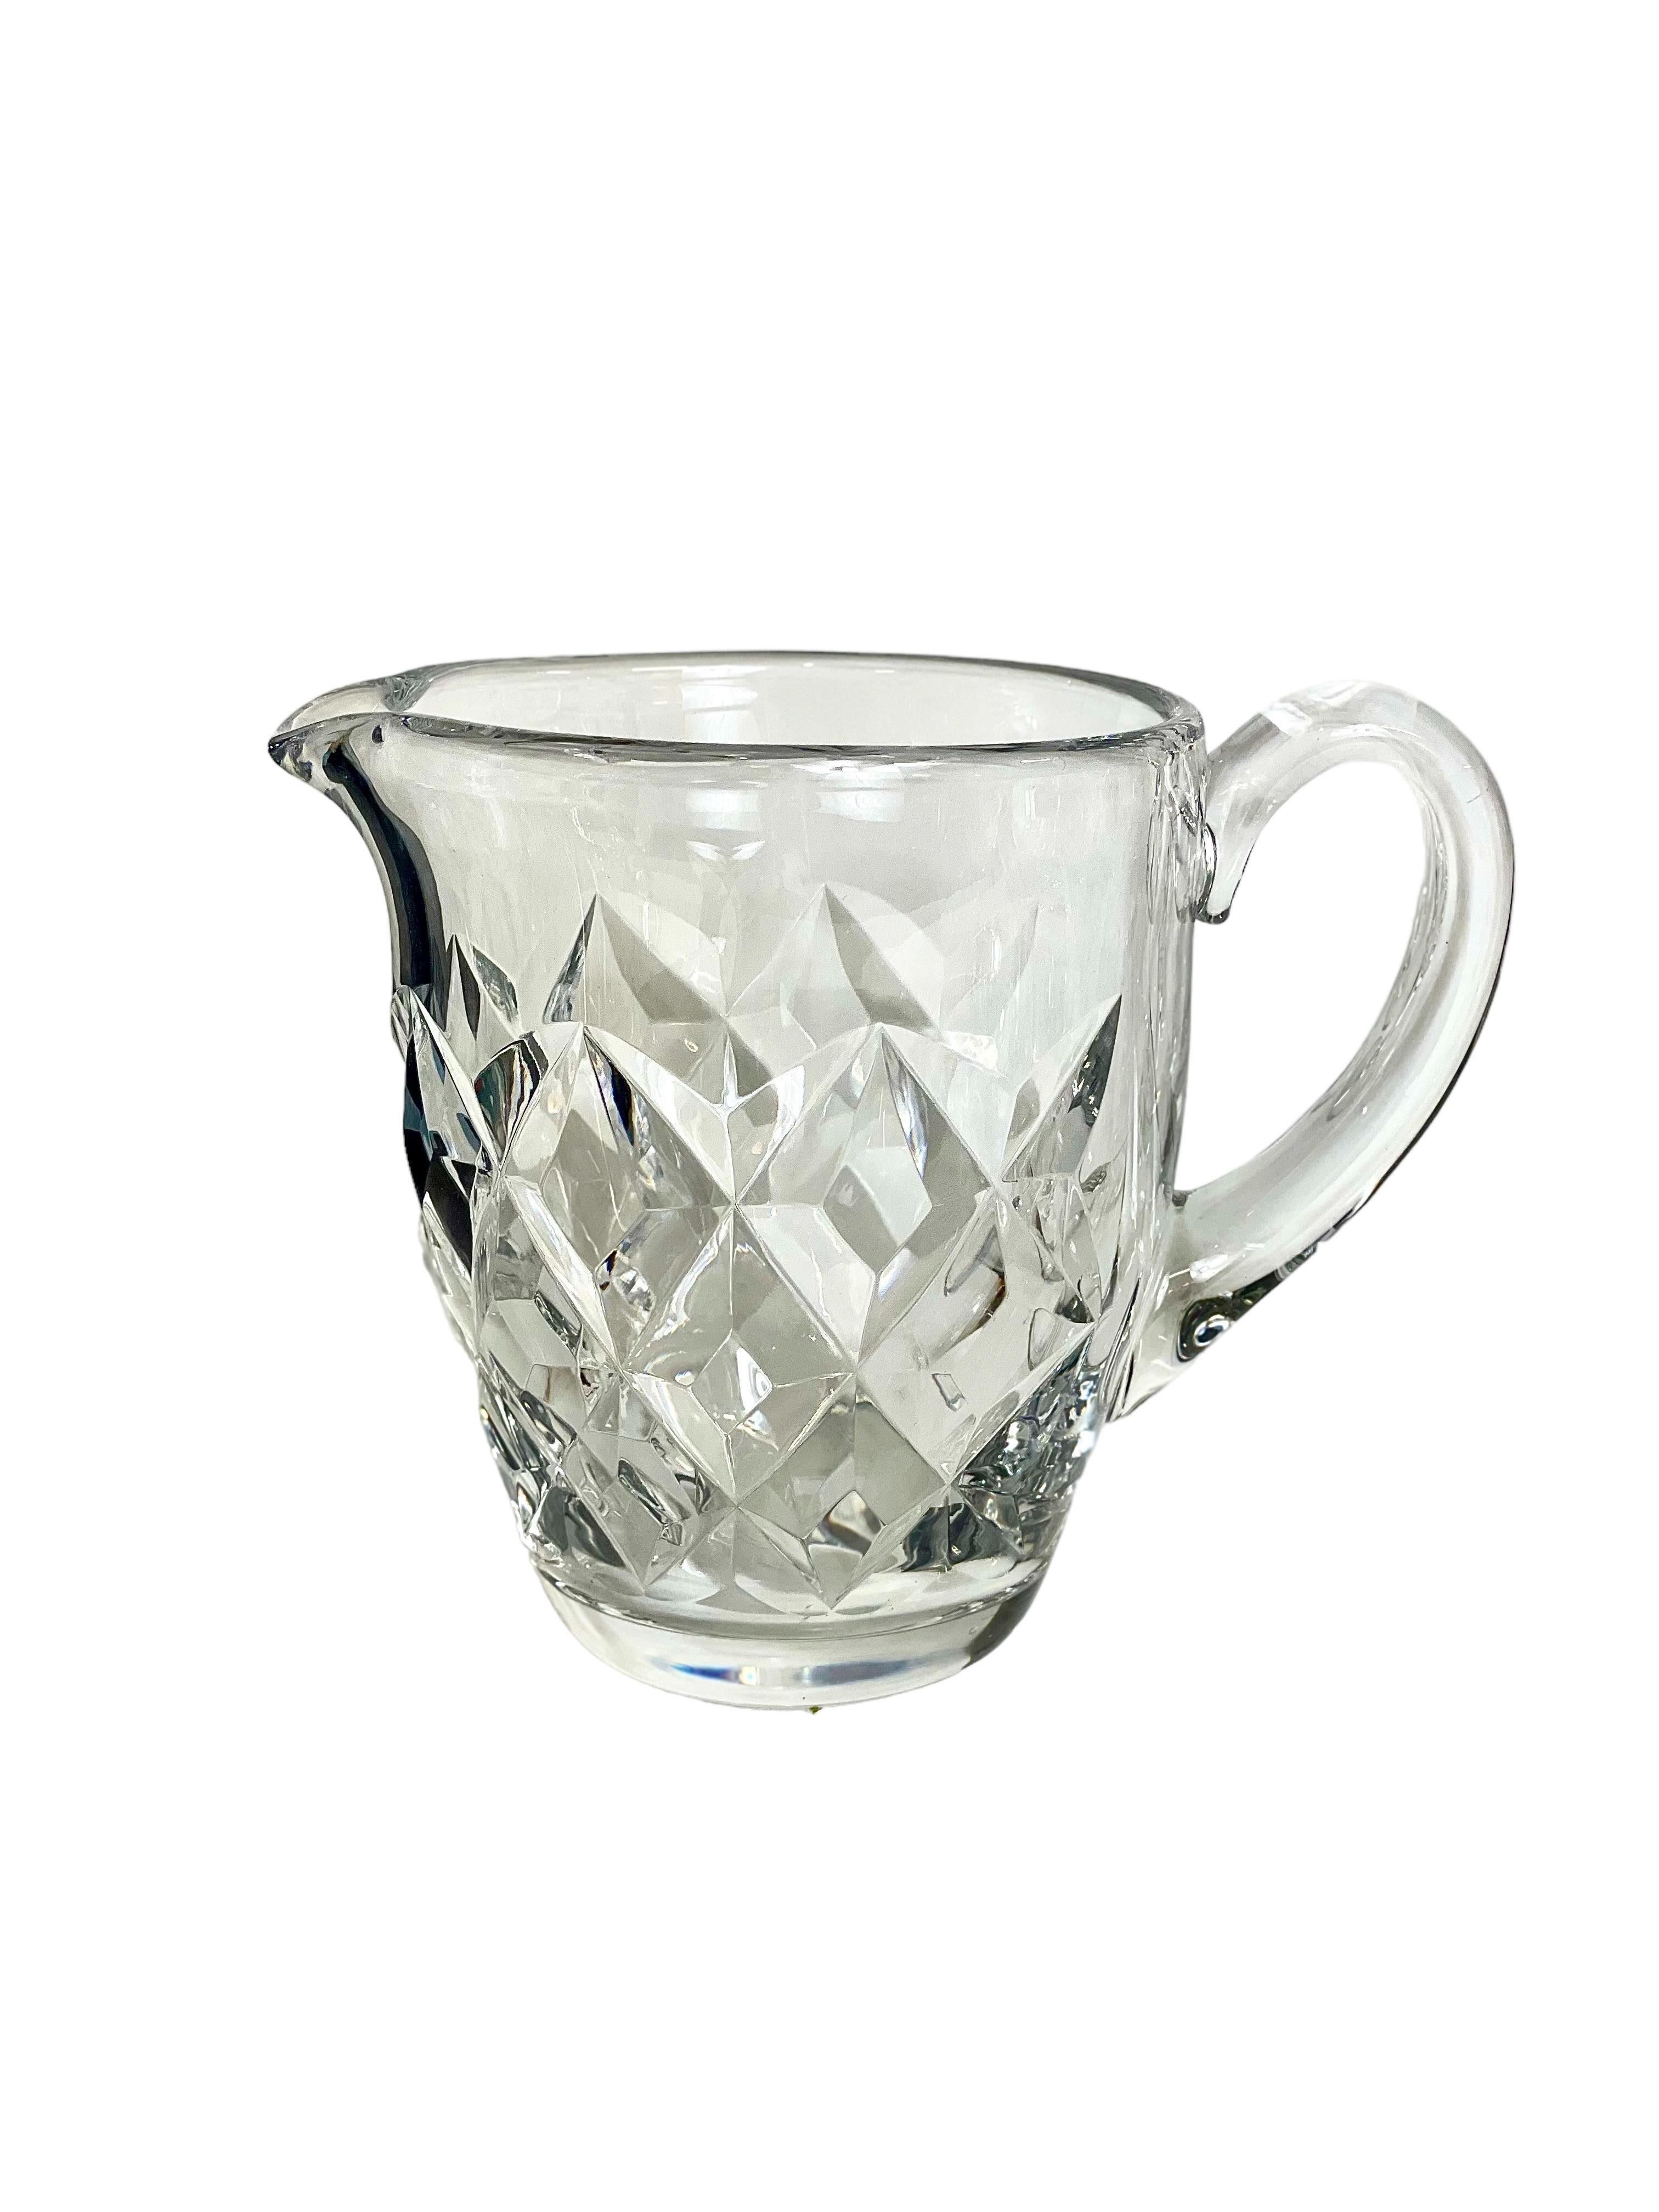 A sparklingly clear Saint Louis crystal water jug, or pitcher, from the 'Adour' pattern series, dating from around 1950. This timeless design, with its network of cross-cut diamonds, was first listed in the company's 1948 catalogue. Its ergonomic